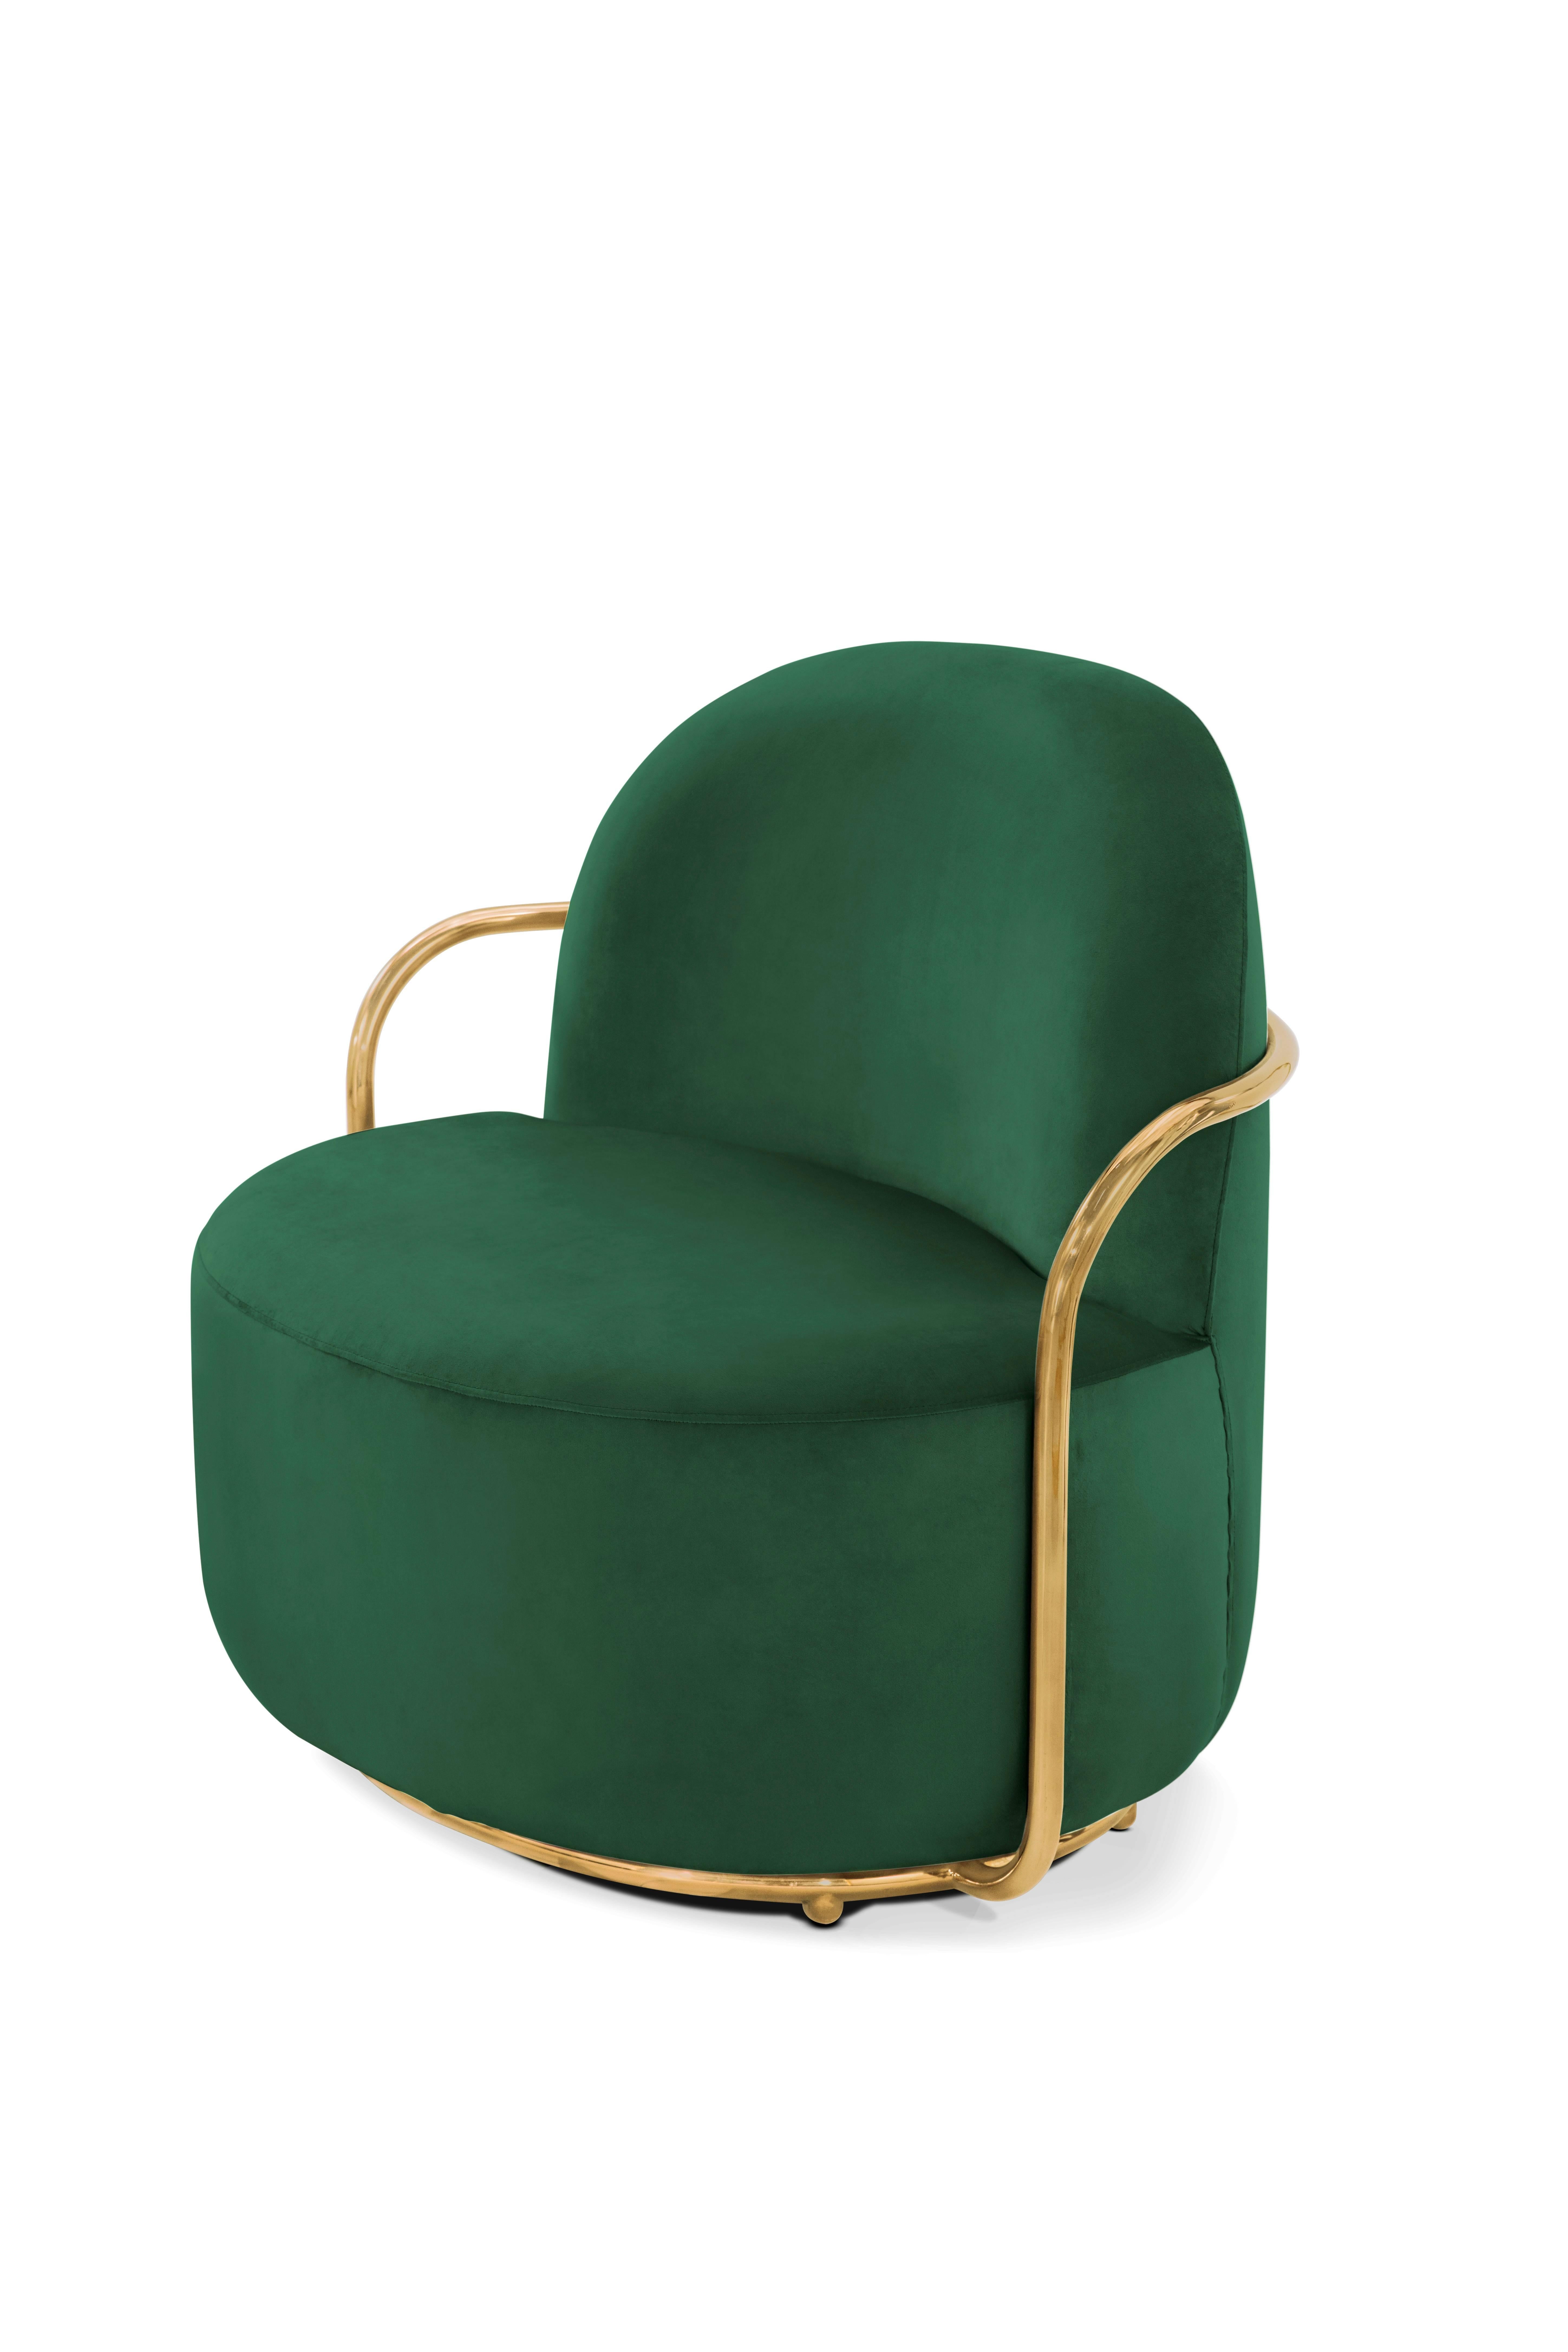 Orion lounge chair Green by Nika Zupanc for Scarlet Splendour

The 88 constellations of the universe mysterious and magical, holding a promise to guide our destinies. Little wonder that they are the muse for the 88 Secrets, Nika Zupanc’s debut